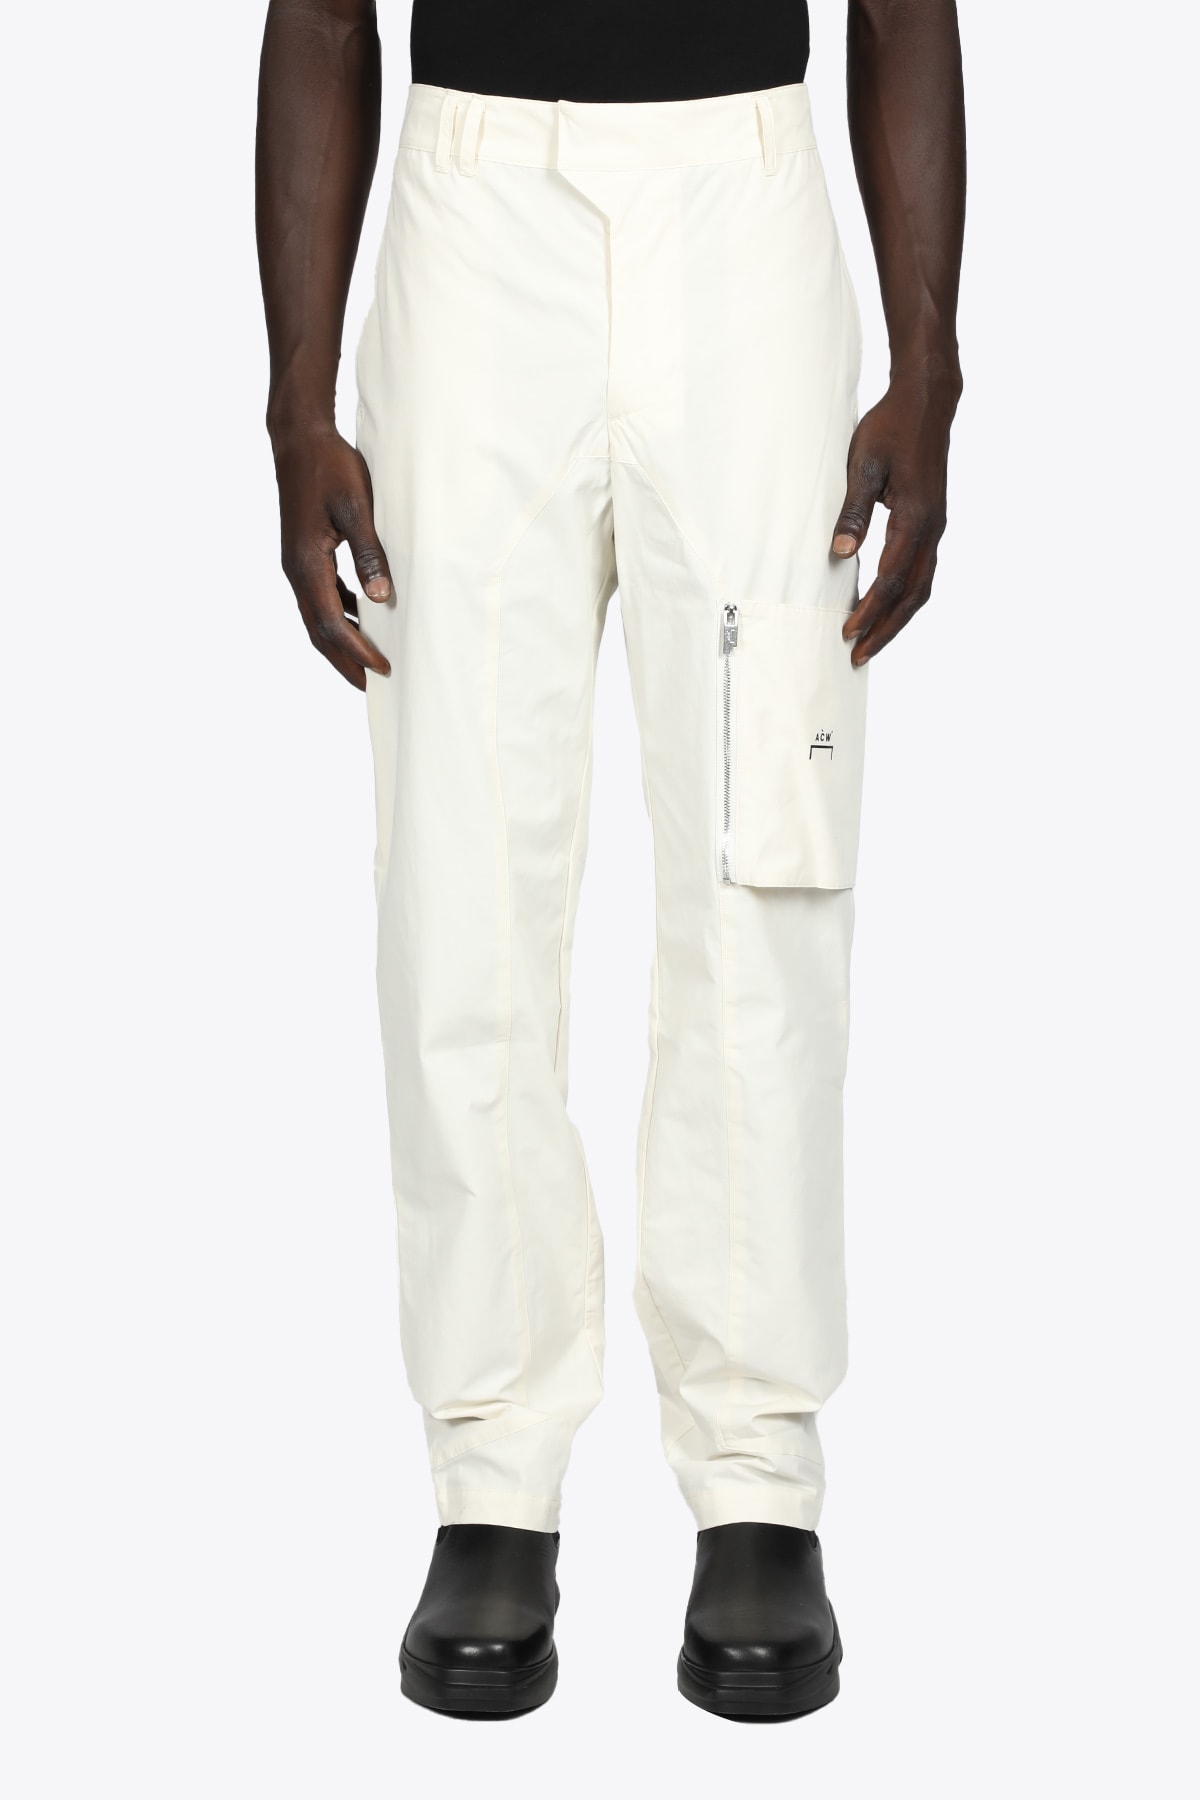 A-COLD-WALL Circuit Cargo Pants Off-white poplin cargo pant